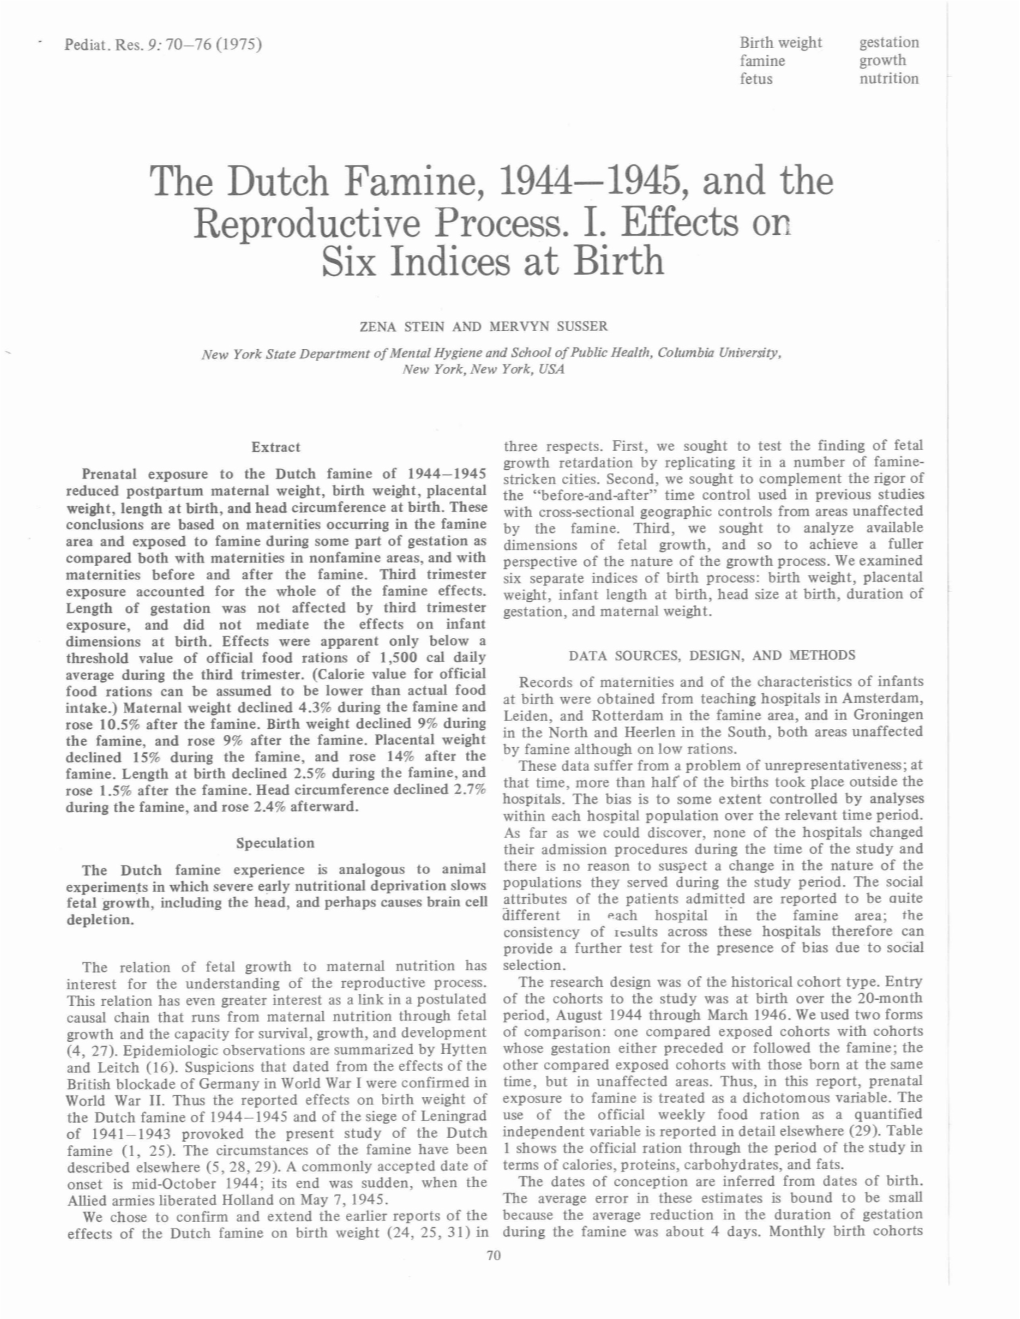 The Dutch Famine, 1944-1945, and the Reproductive Process. I. Effects Or, Six Indices at Birth